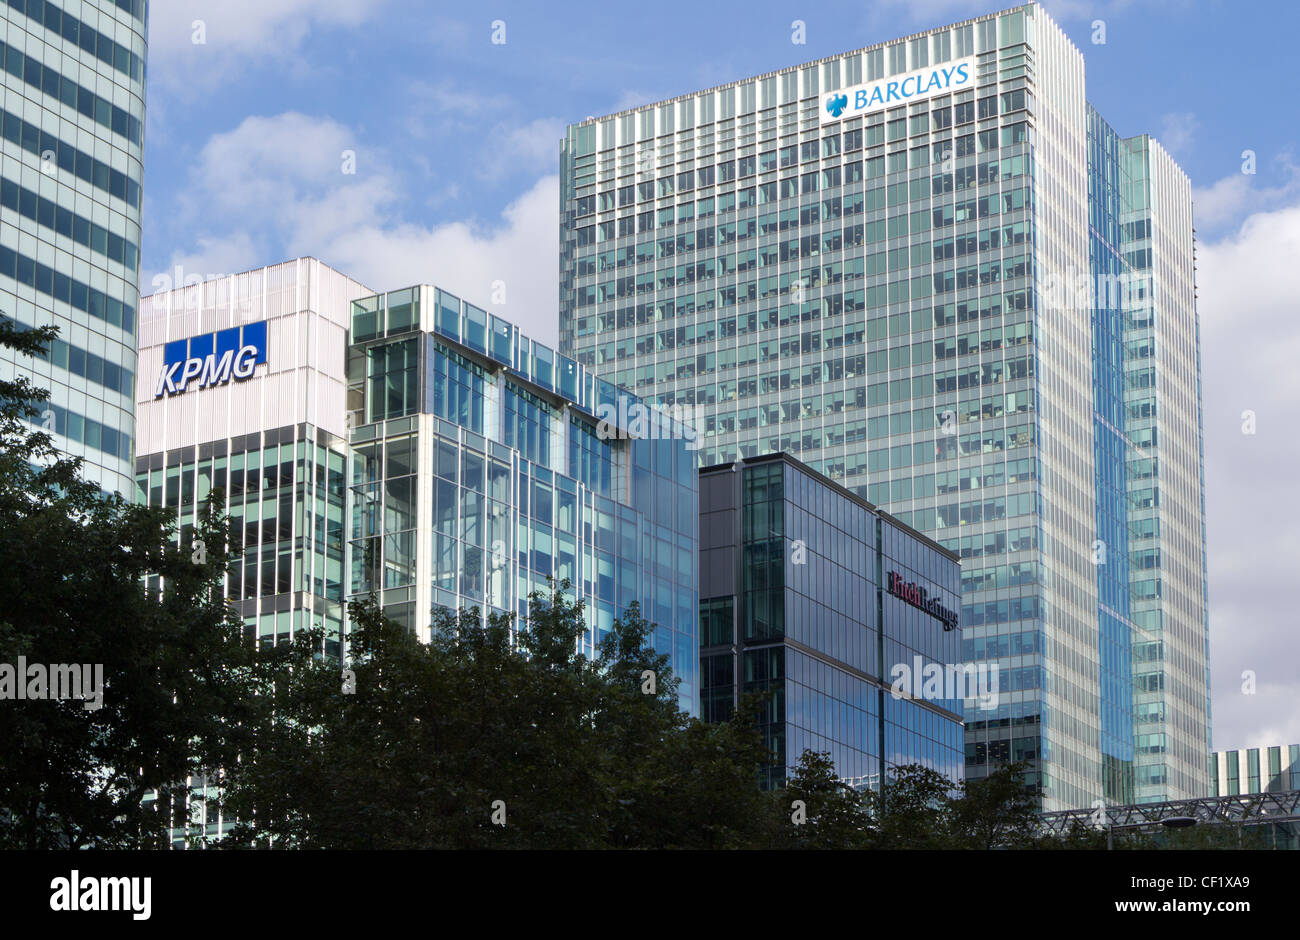 KPMG und Barclays Gebäude in Canary Wharf, London Docklands. Auch Fitch Ratings und Barclays Bank. Stockfoto